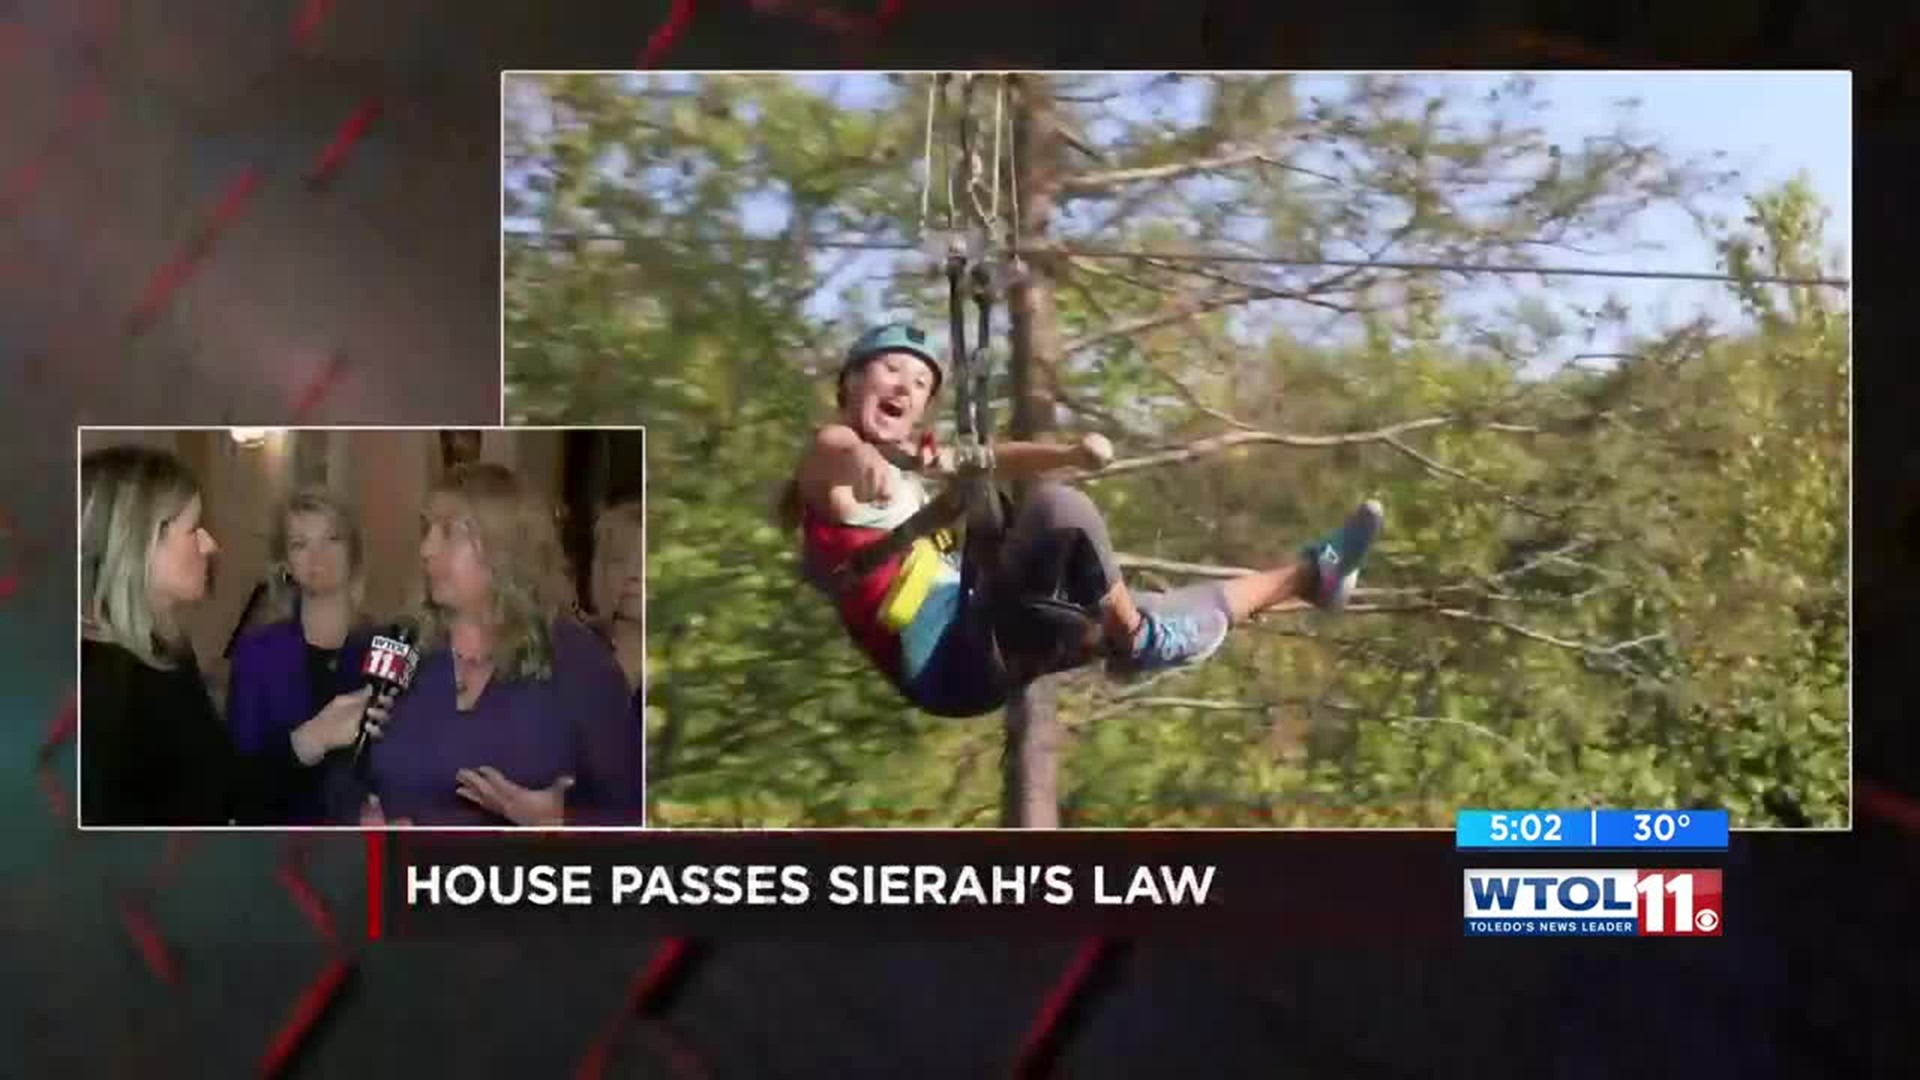 Sierah Law passed the House